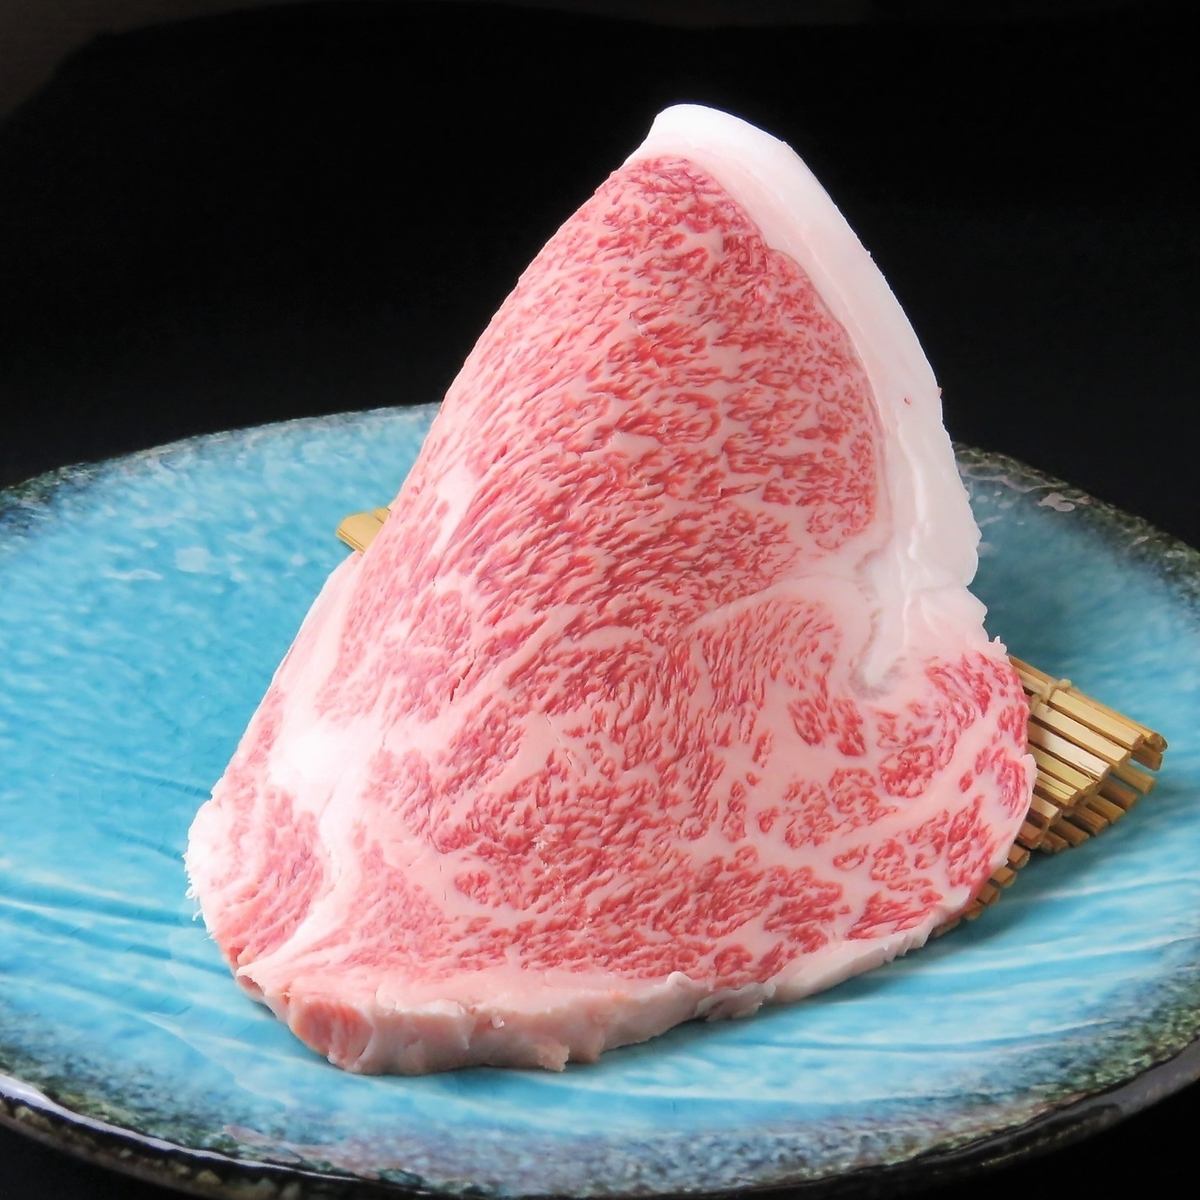 Please enjoy the special meat carefully selected by the professional "Yakiniku sommelier" of yakiniku.